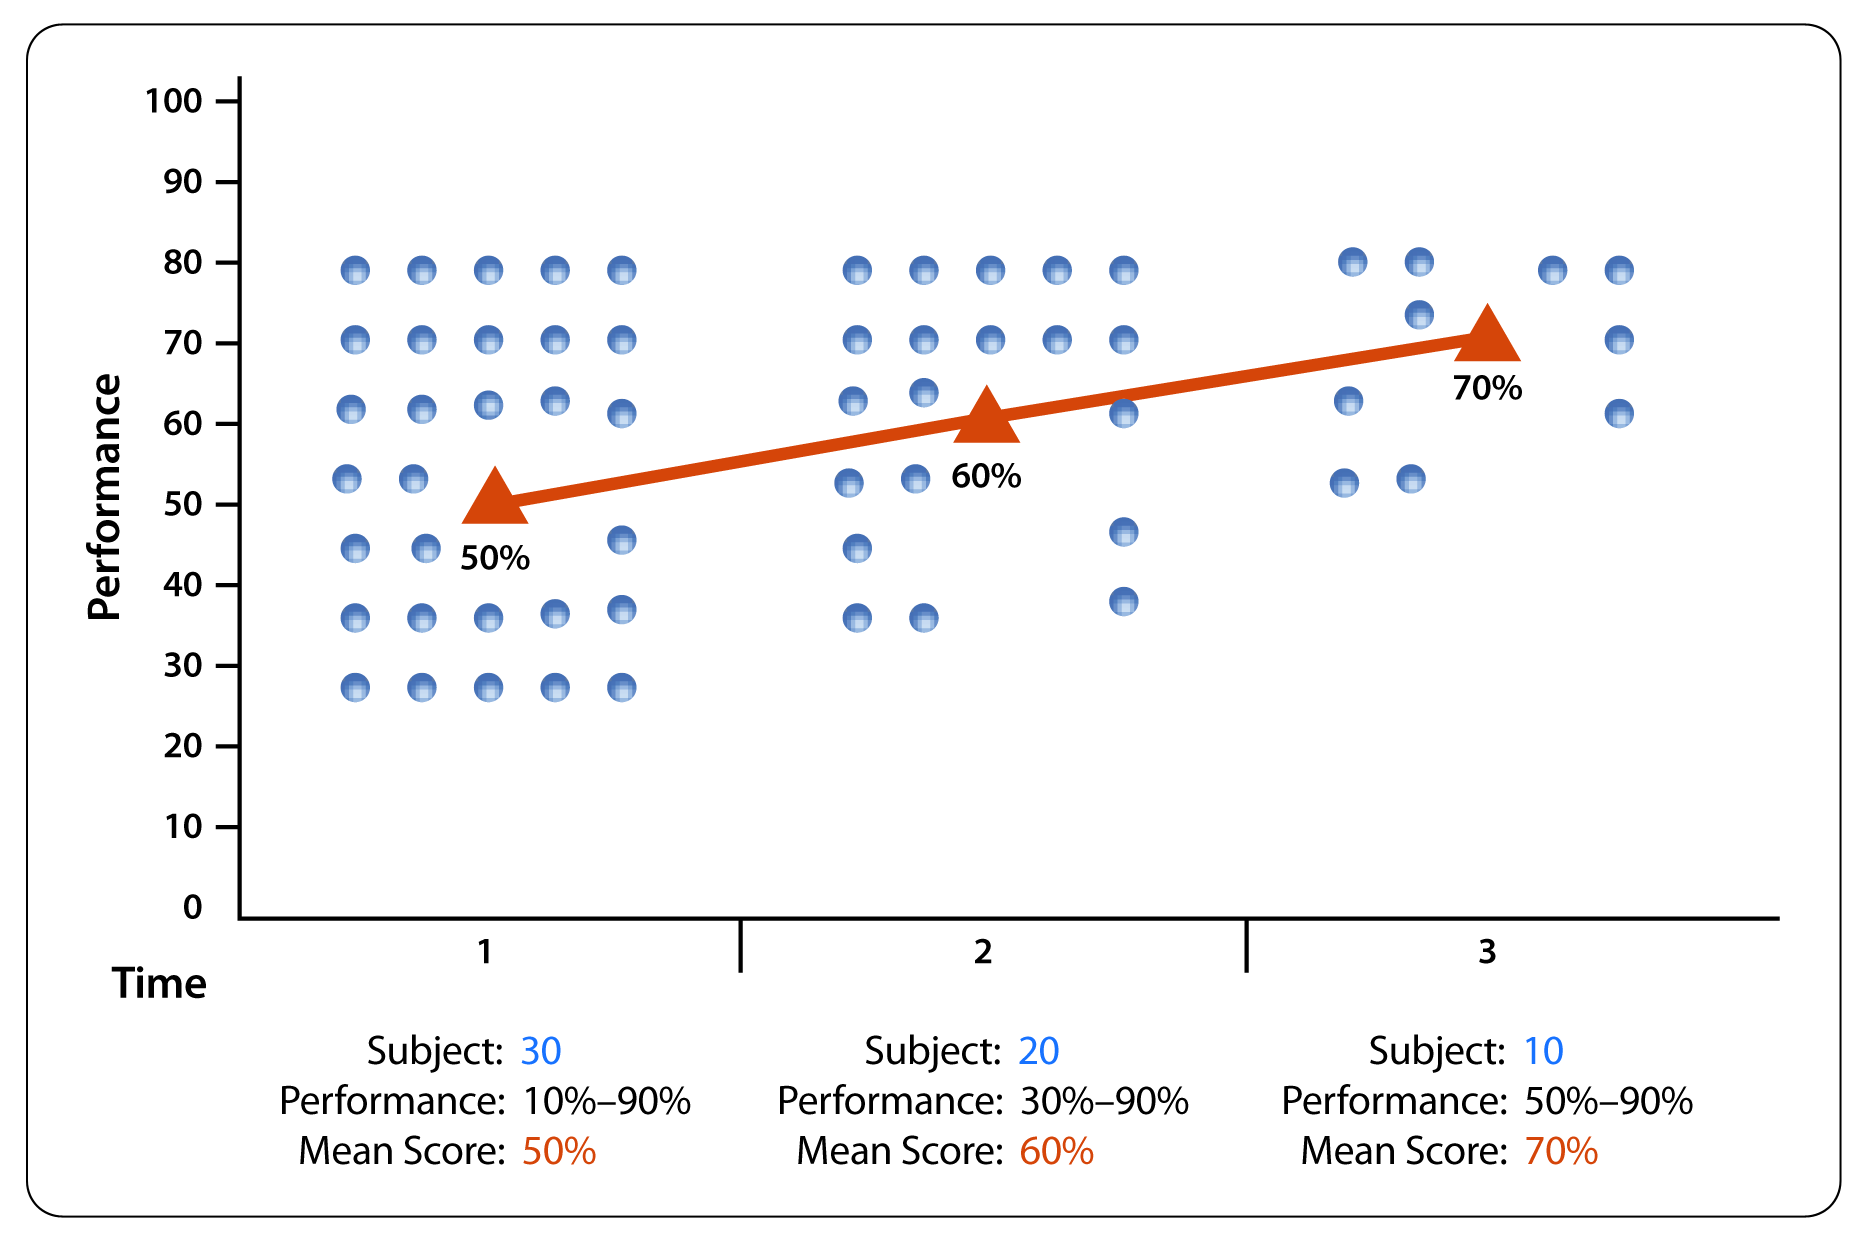 This graph plots the performance of 30 participants in a longitudinal study on a test.  At the first test-taking of the longitudinal study, their performance ranged from 10% to 90%, and the average score was 50%.  At the second test-taking of the longitudinal study, only 20 participants remain.  Their performance ranged from 30% to 90%, and the average score was 60%.  At the third test-taking of the longitudinal study, only 10 participants remain.  Their performance ranged from 50% to 90%, and the average score was 70%.